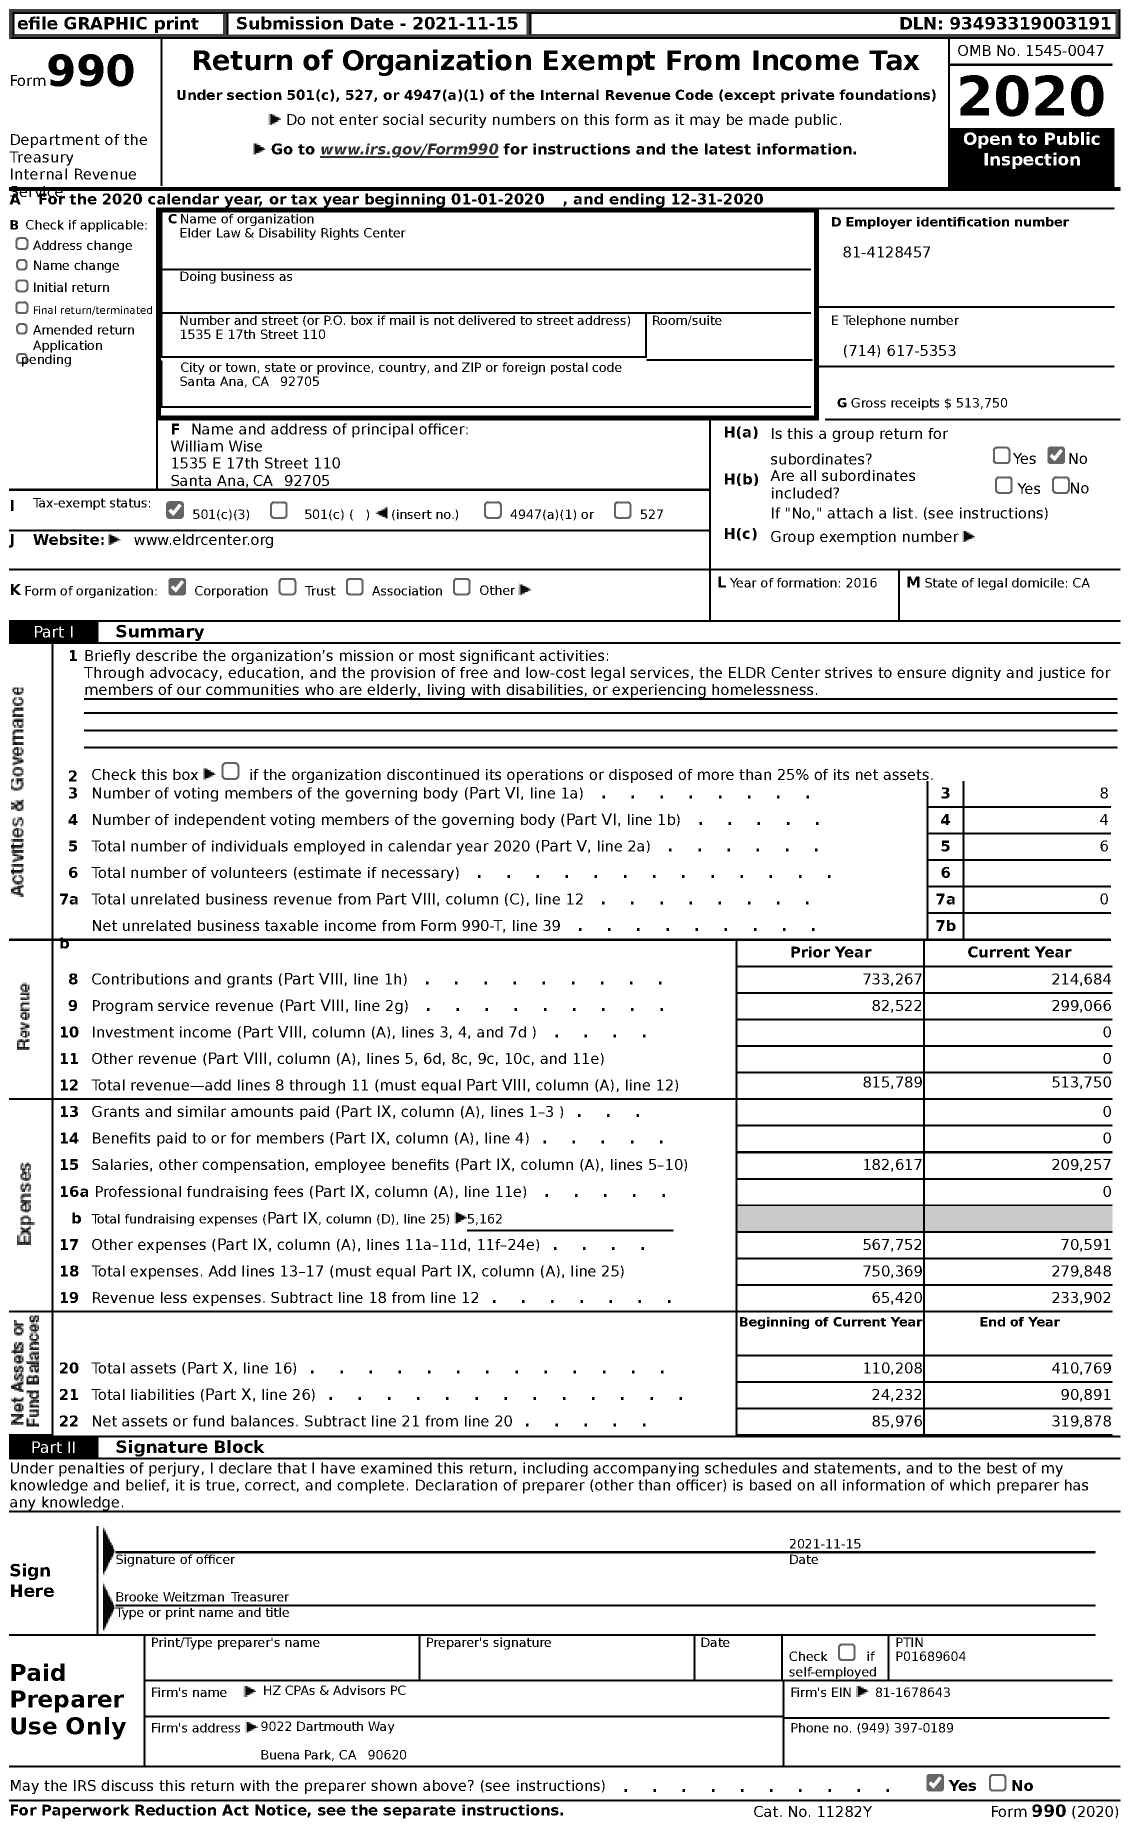 Image of first page of 2020 Form 990 for Elder Law and Disability Rights Center